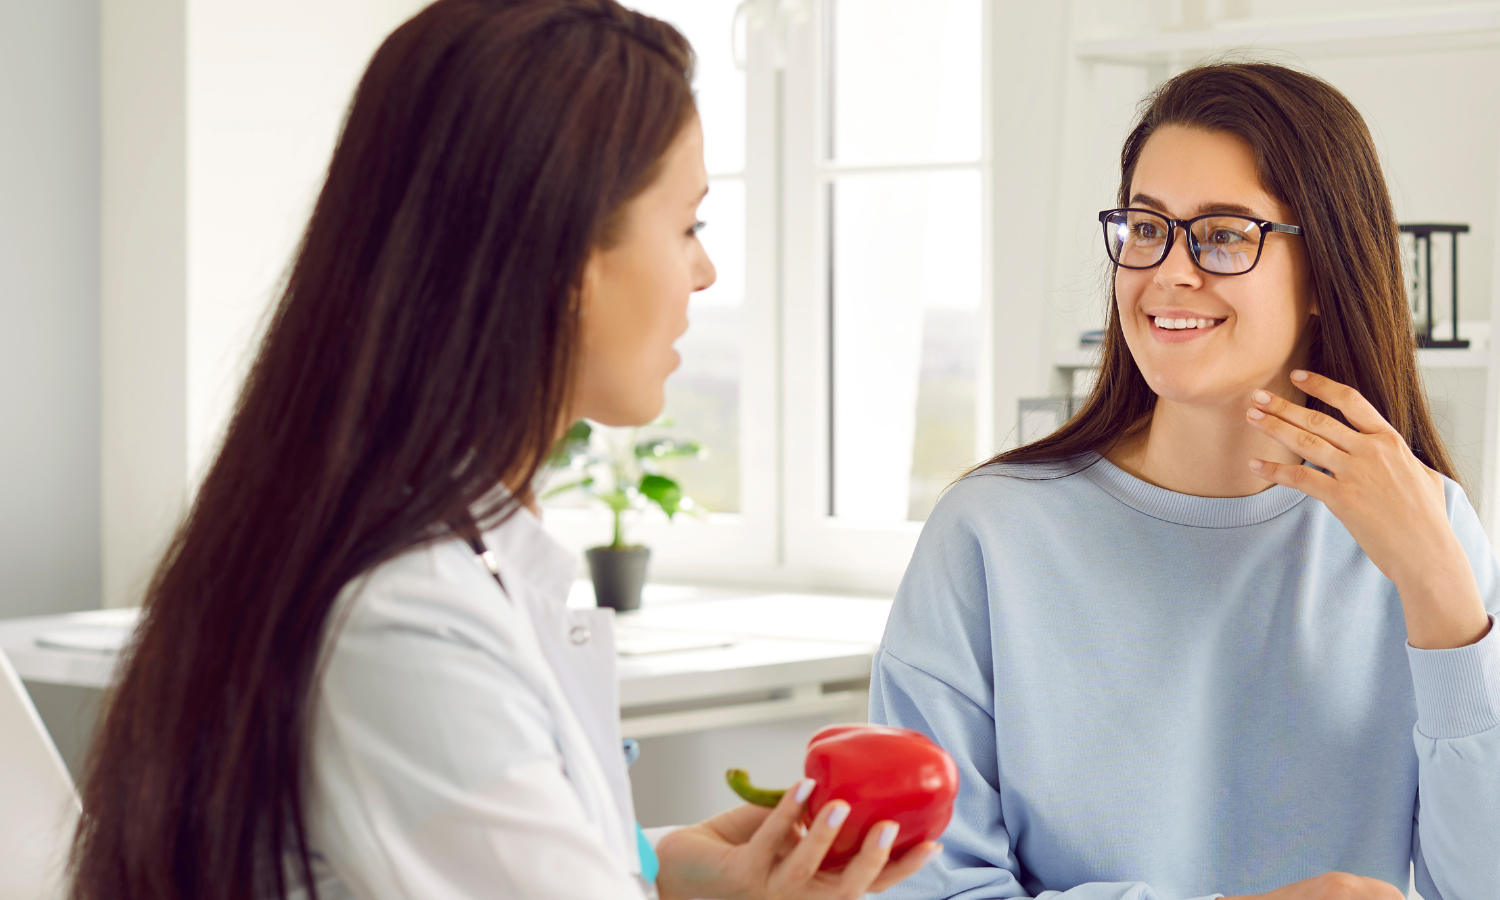 Female dietitian holding a red bell pepper while talking to patient